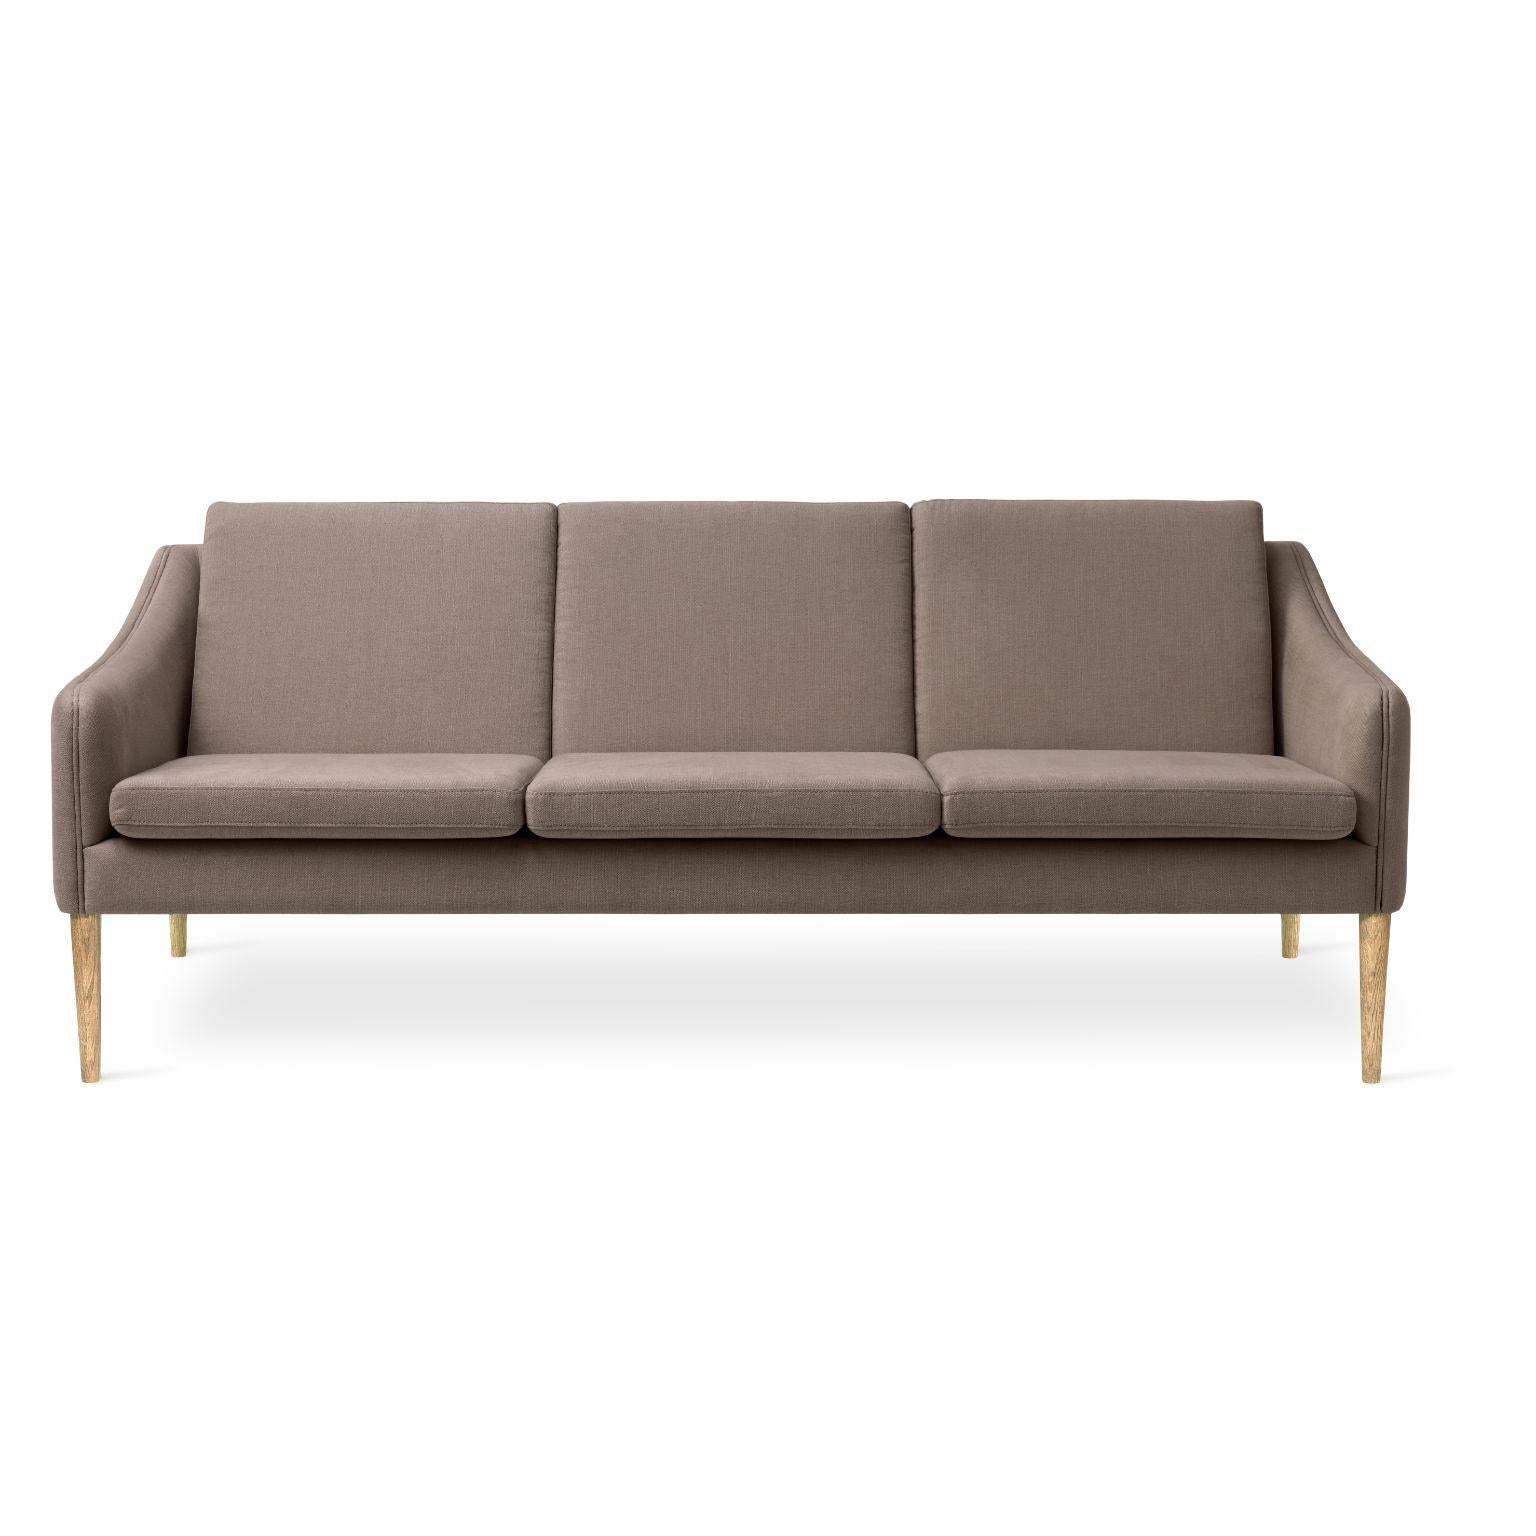 Mr Olsen 3 seater oak broken grey by Warm Nordic
Dimensions: D201 x W79 x H 78/46 cm
Material: Textile upholstery, Foam, Spring system, Solid oiled oak legs, Solid smoked oak legs
Weight: 50 kg
Also available in different colours and finishes.